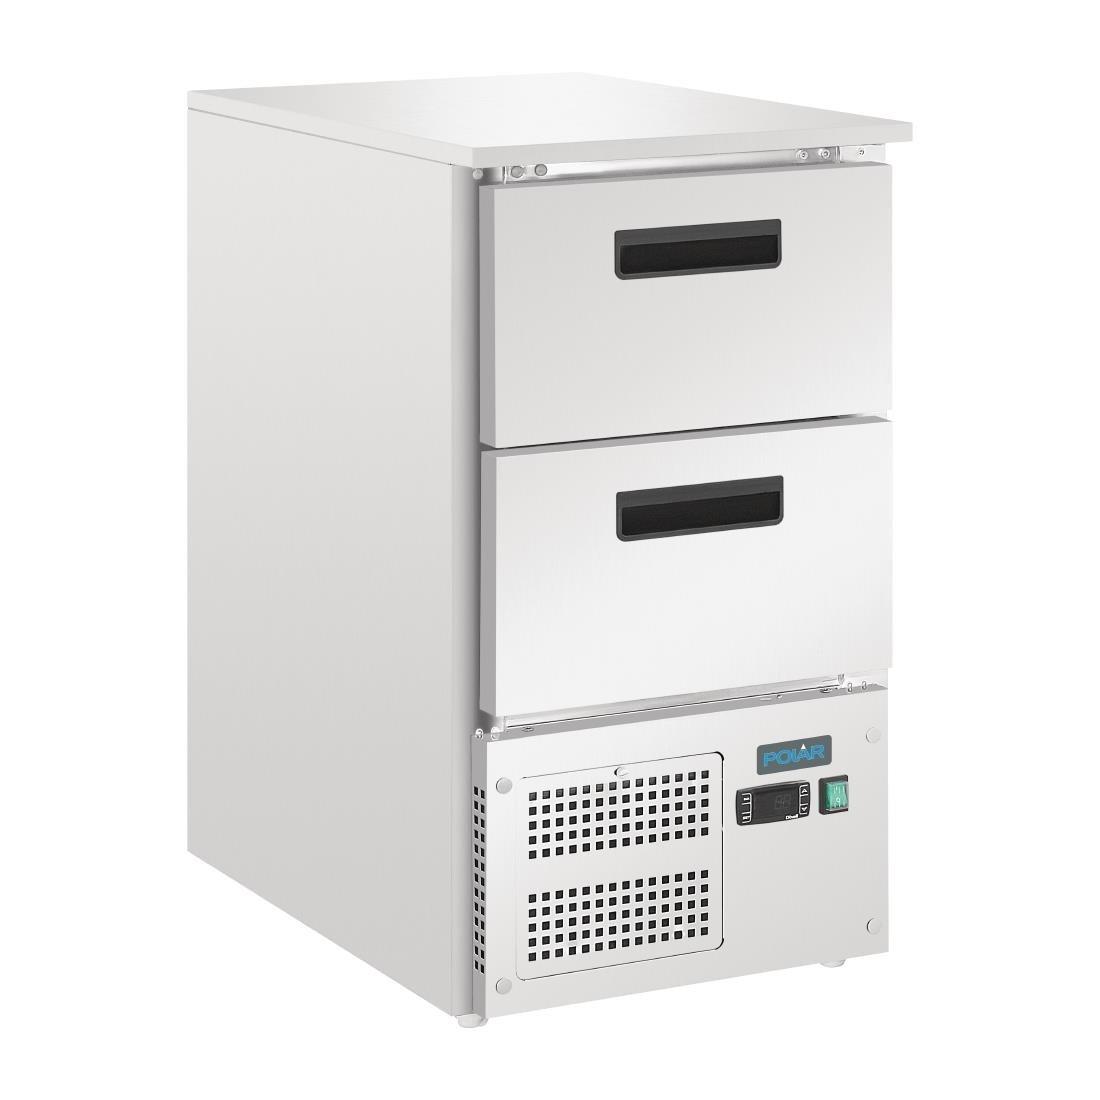 Polar G-Series Counter Fridge with 2 GN Drawers